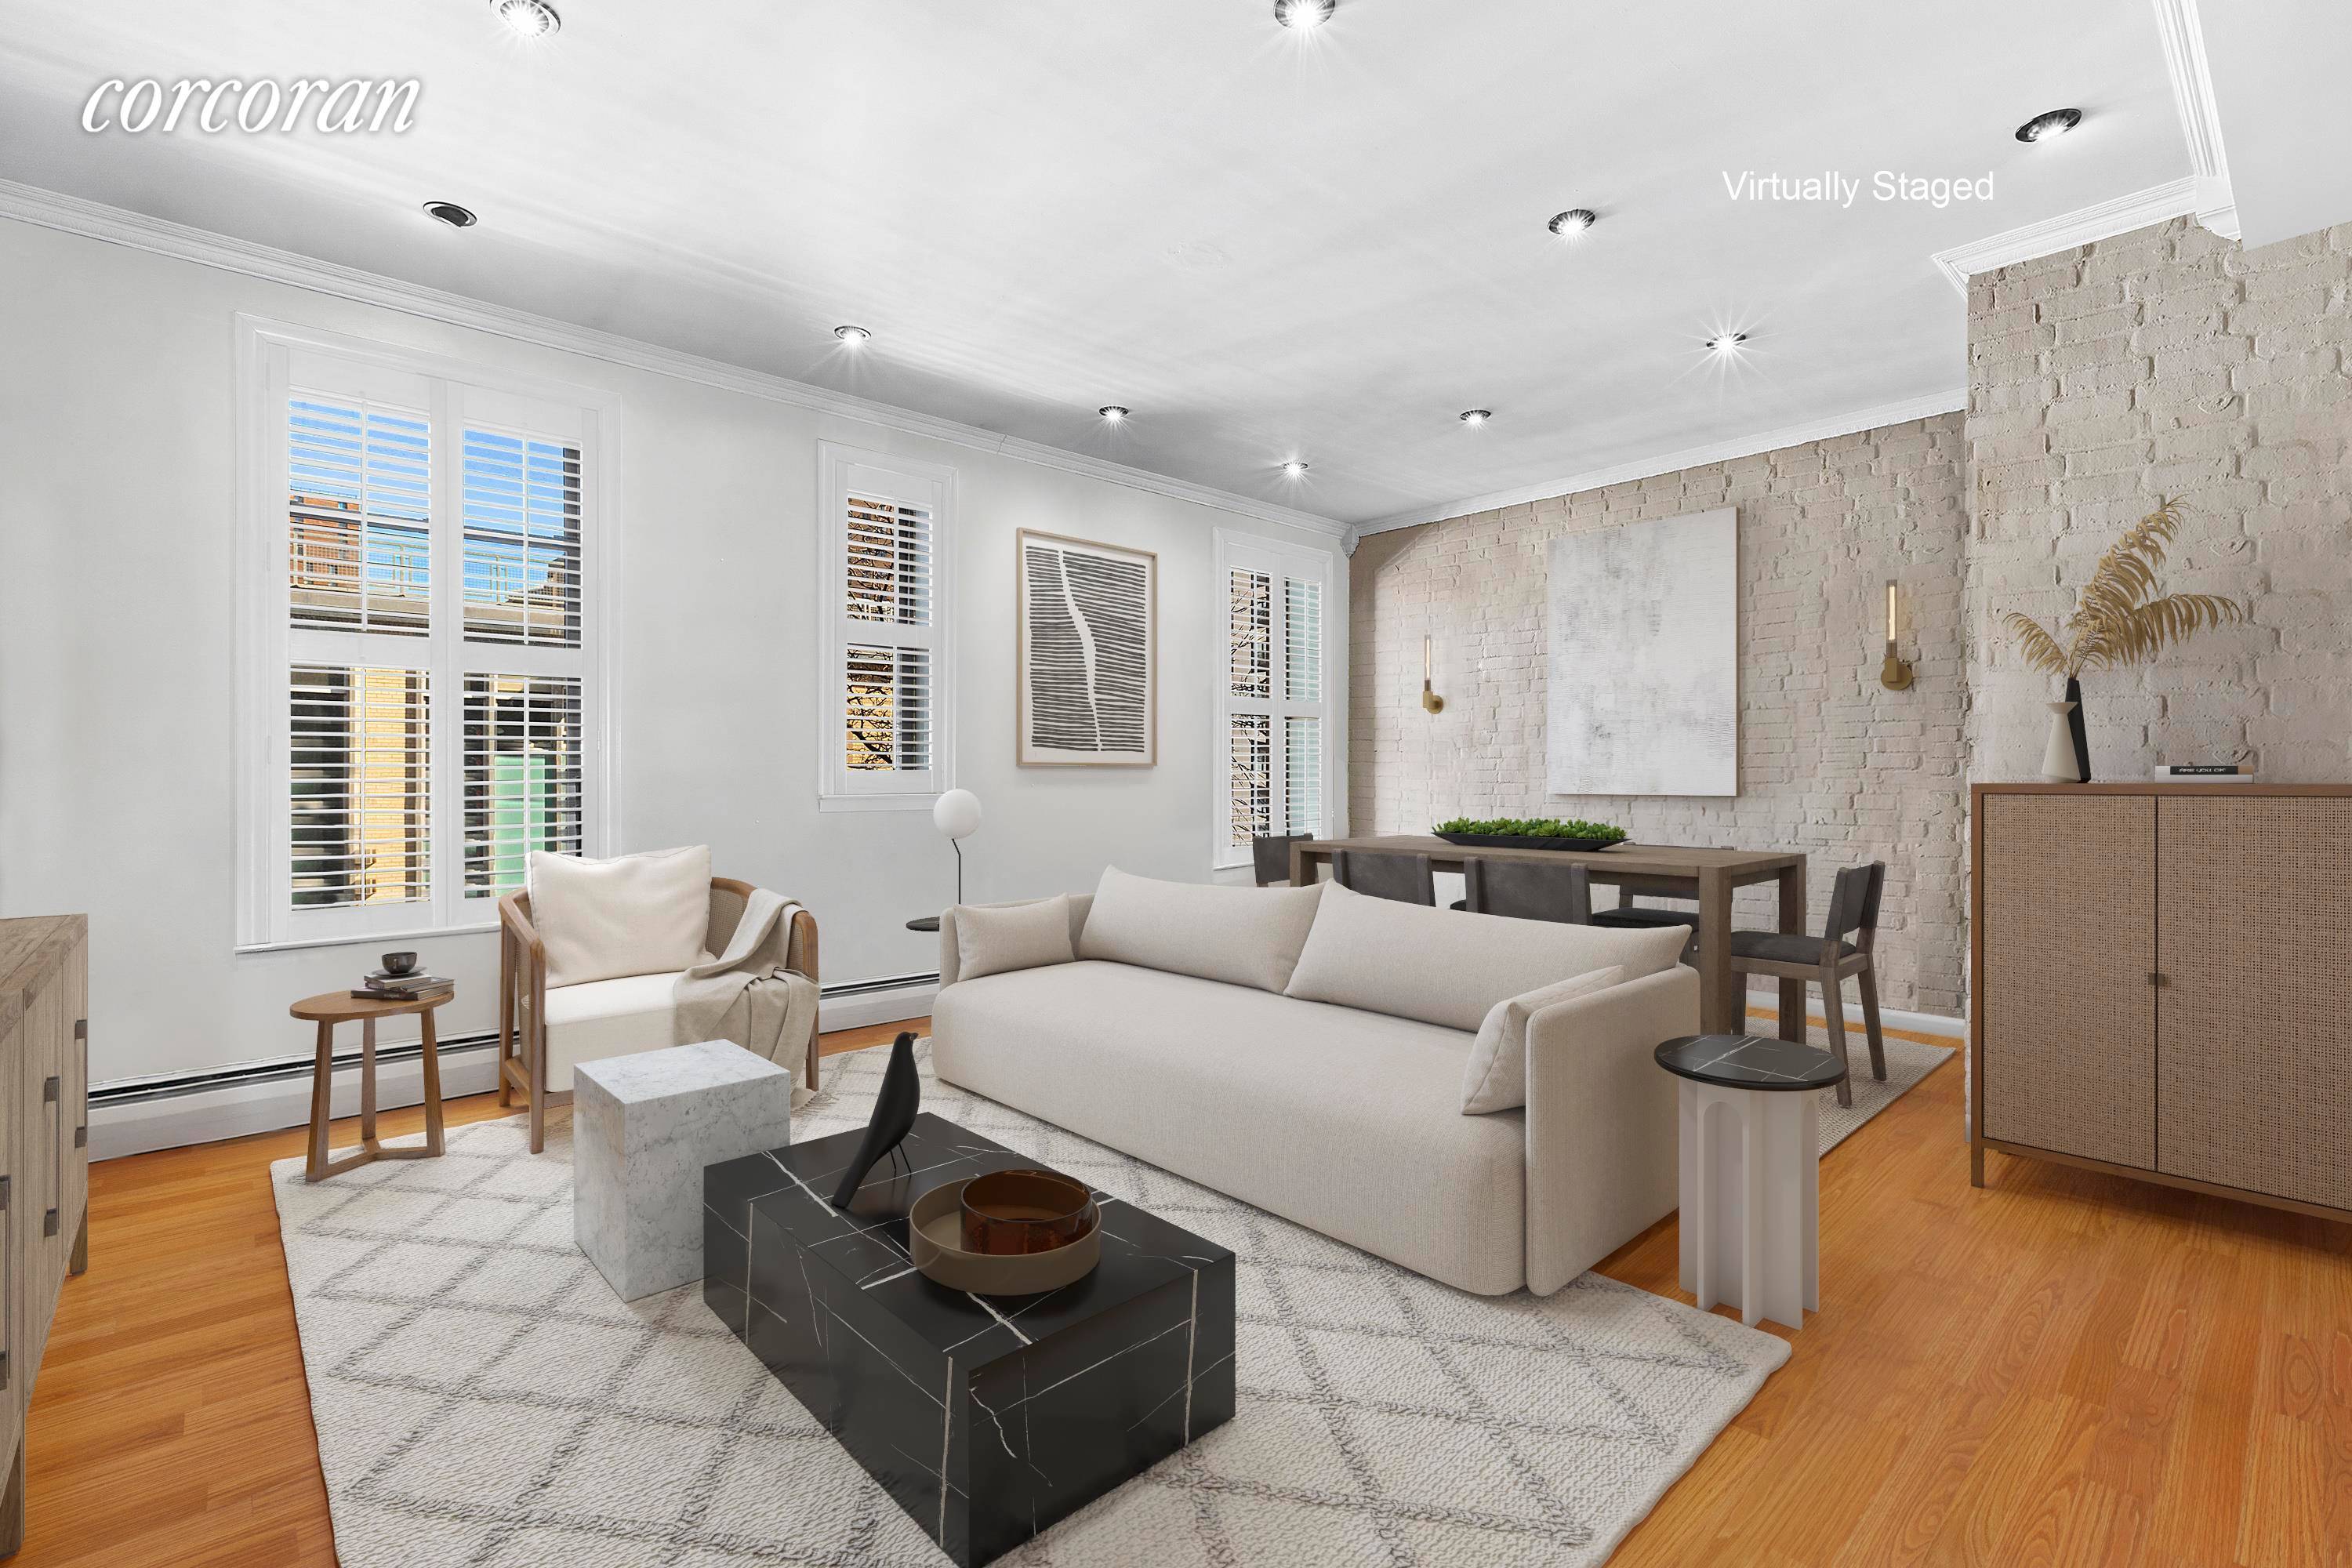 BACK ON THE MARKET. Bordering the historic Striver's Row, lies The Bradhurst Condominium at 2611 Frederick Douglass Boulevard in Central Harlem.